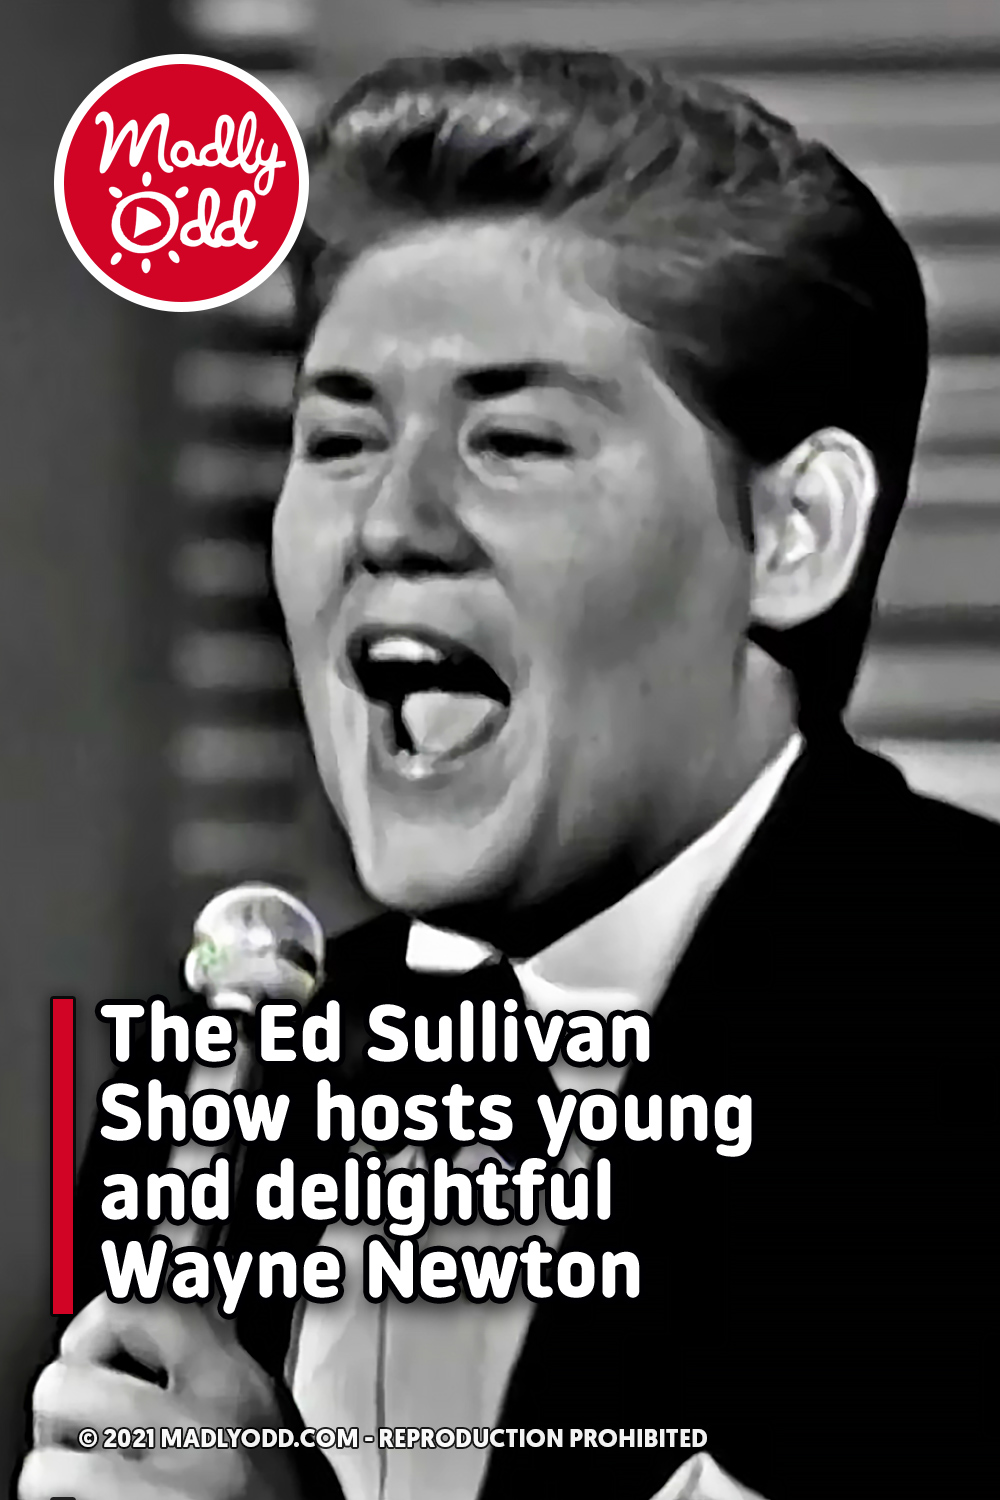 The Ed Sullivan Show hosts young and delightful Wayne Newton